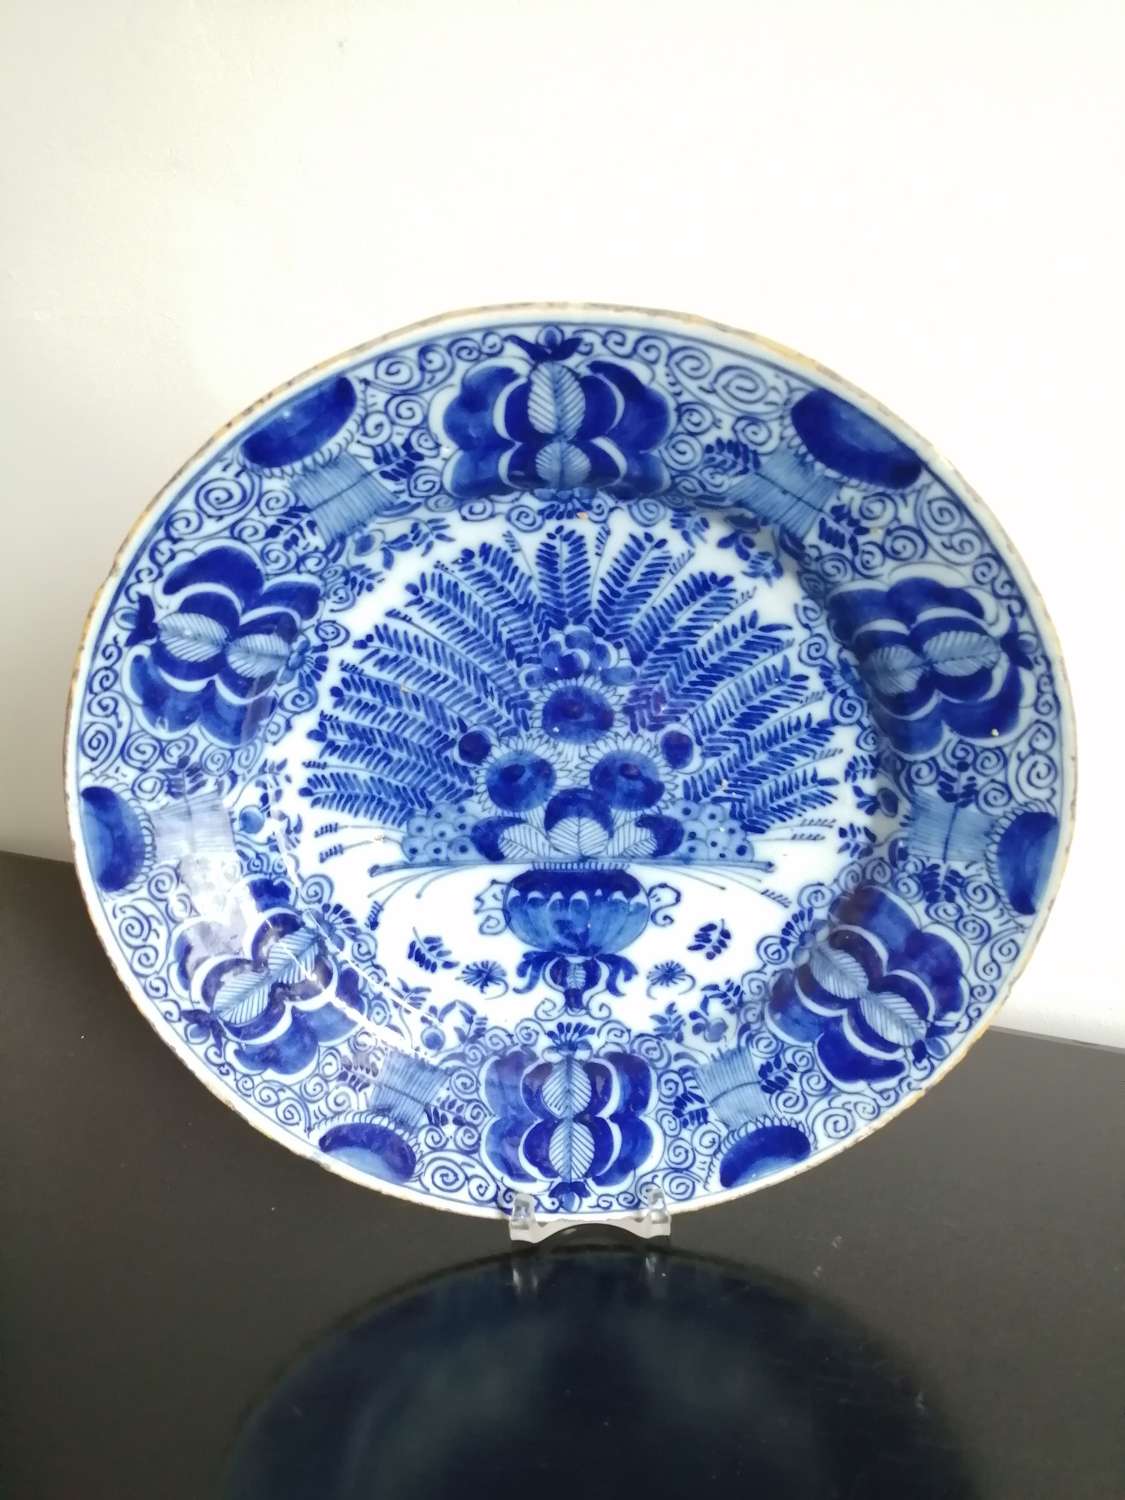 A very attractive 18th century Dutch Delft charger